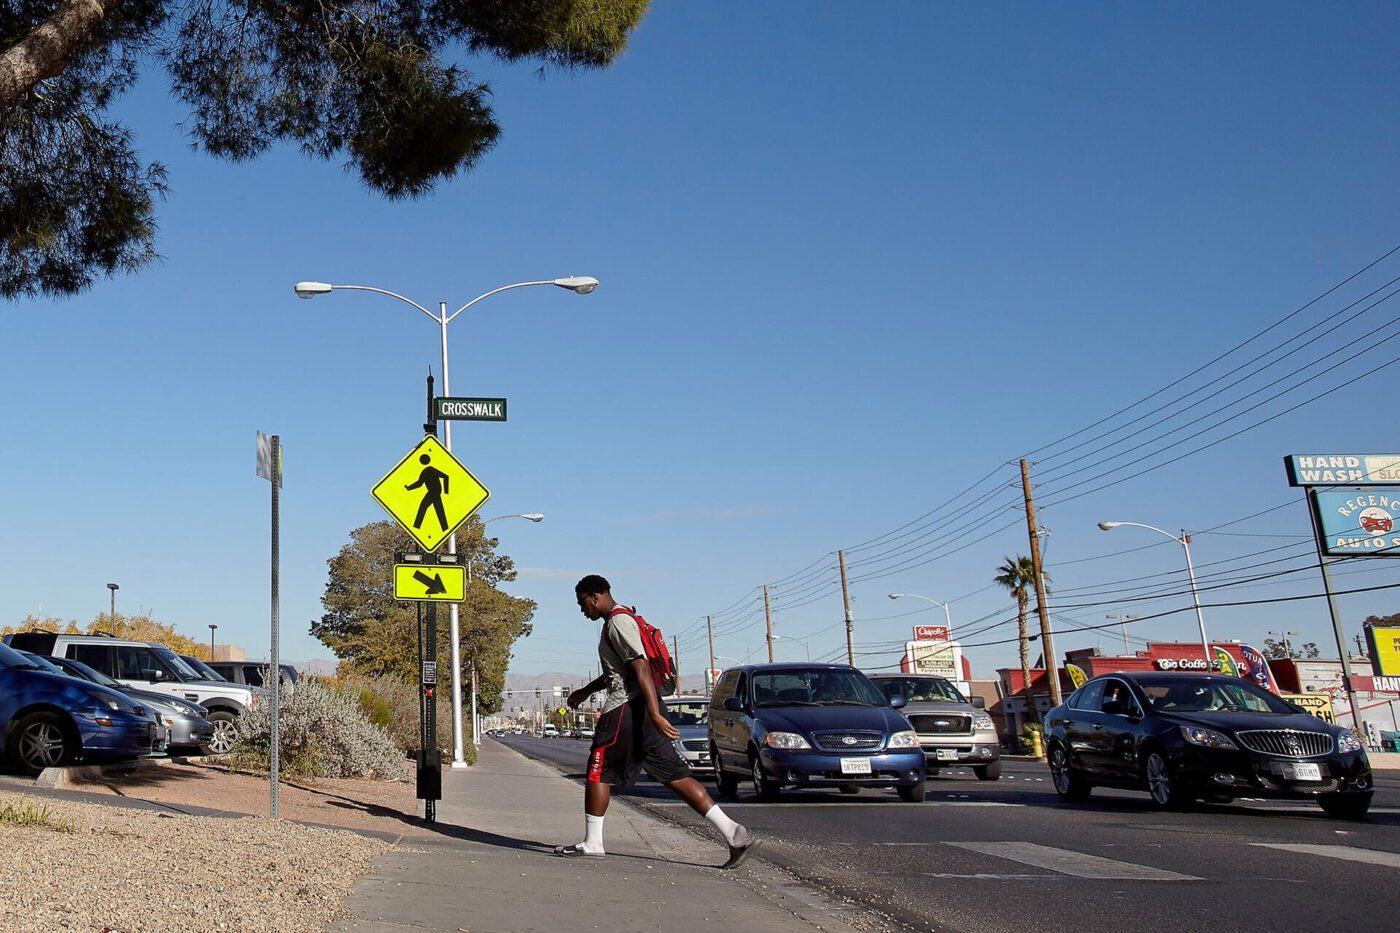 black-youth-walking-across-intersection-1400x933, Walking while Black: The inequitable intersection of racism at the intersection, World News & Views 